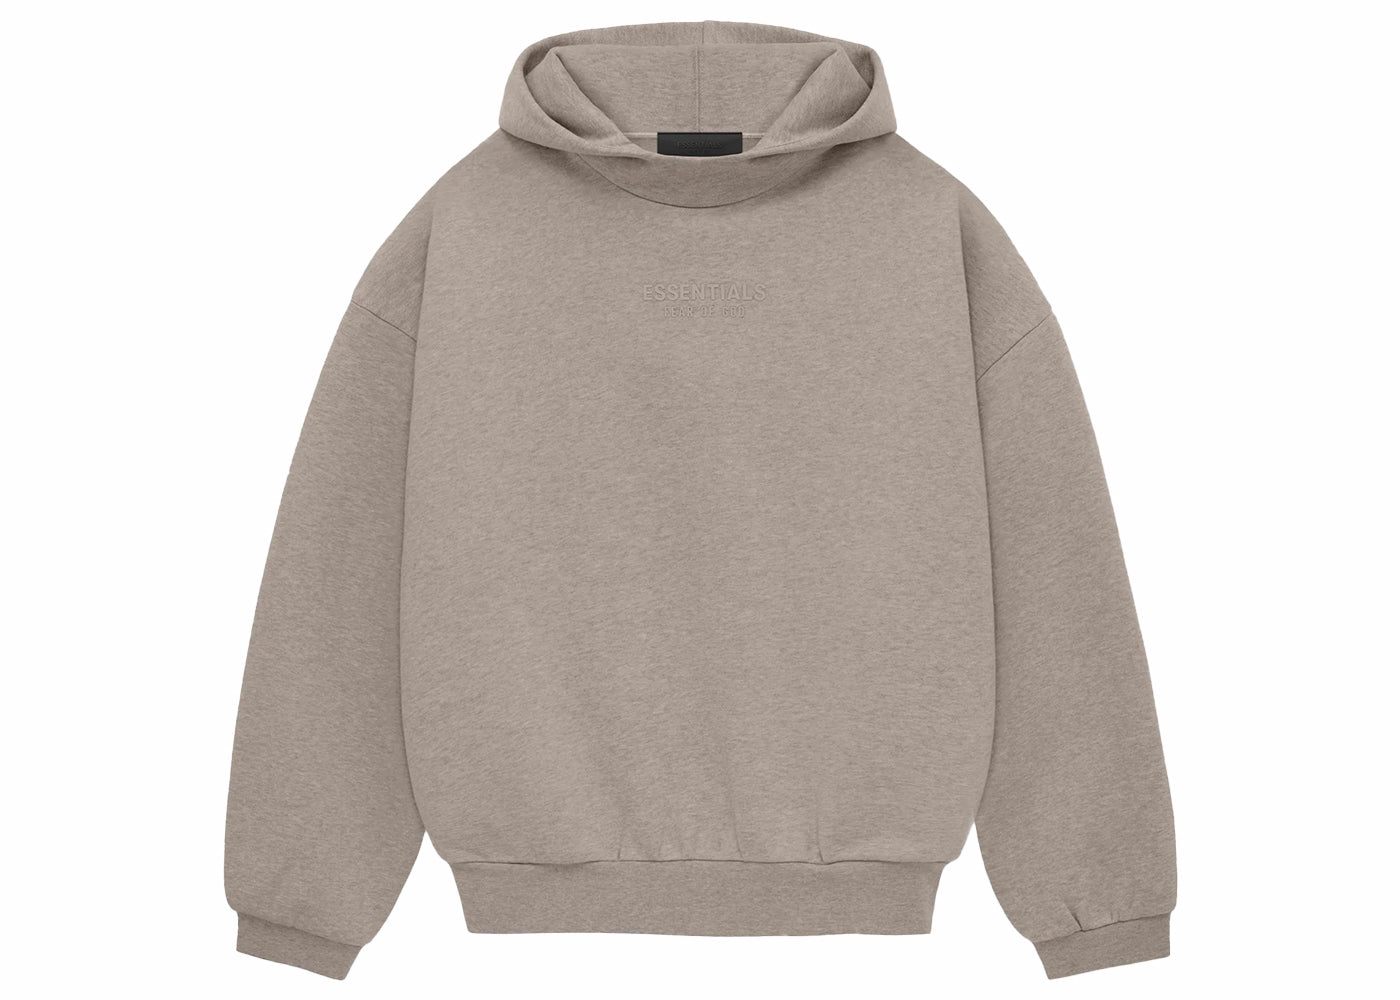 Fear Of God Essentials Hoodie Core Heather - Size: XL